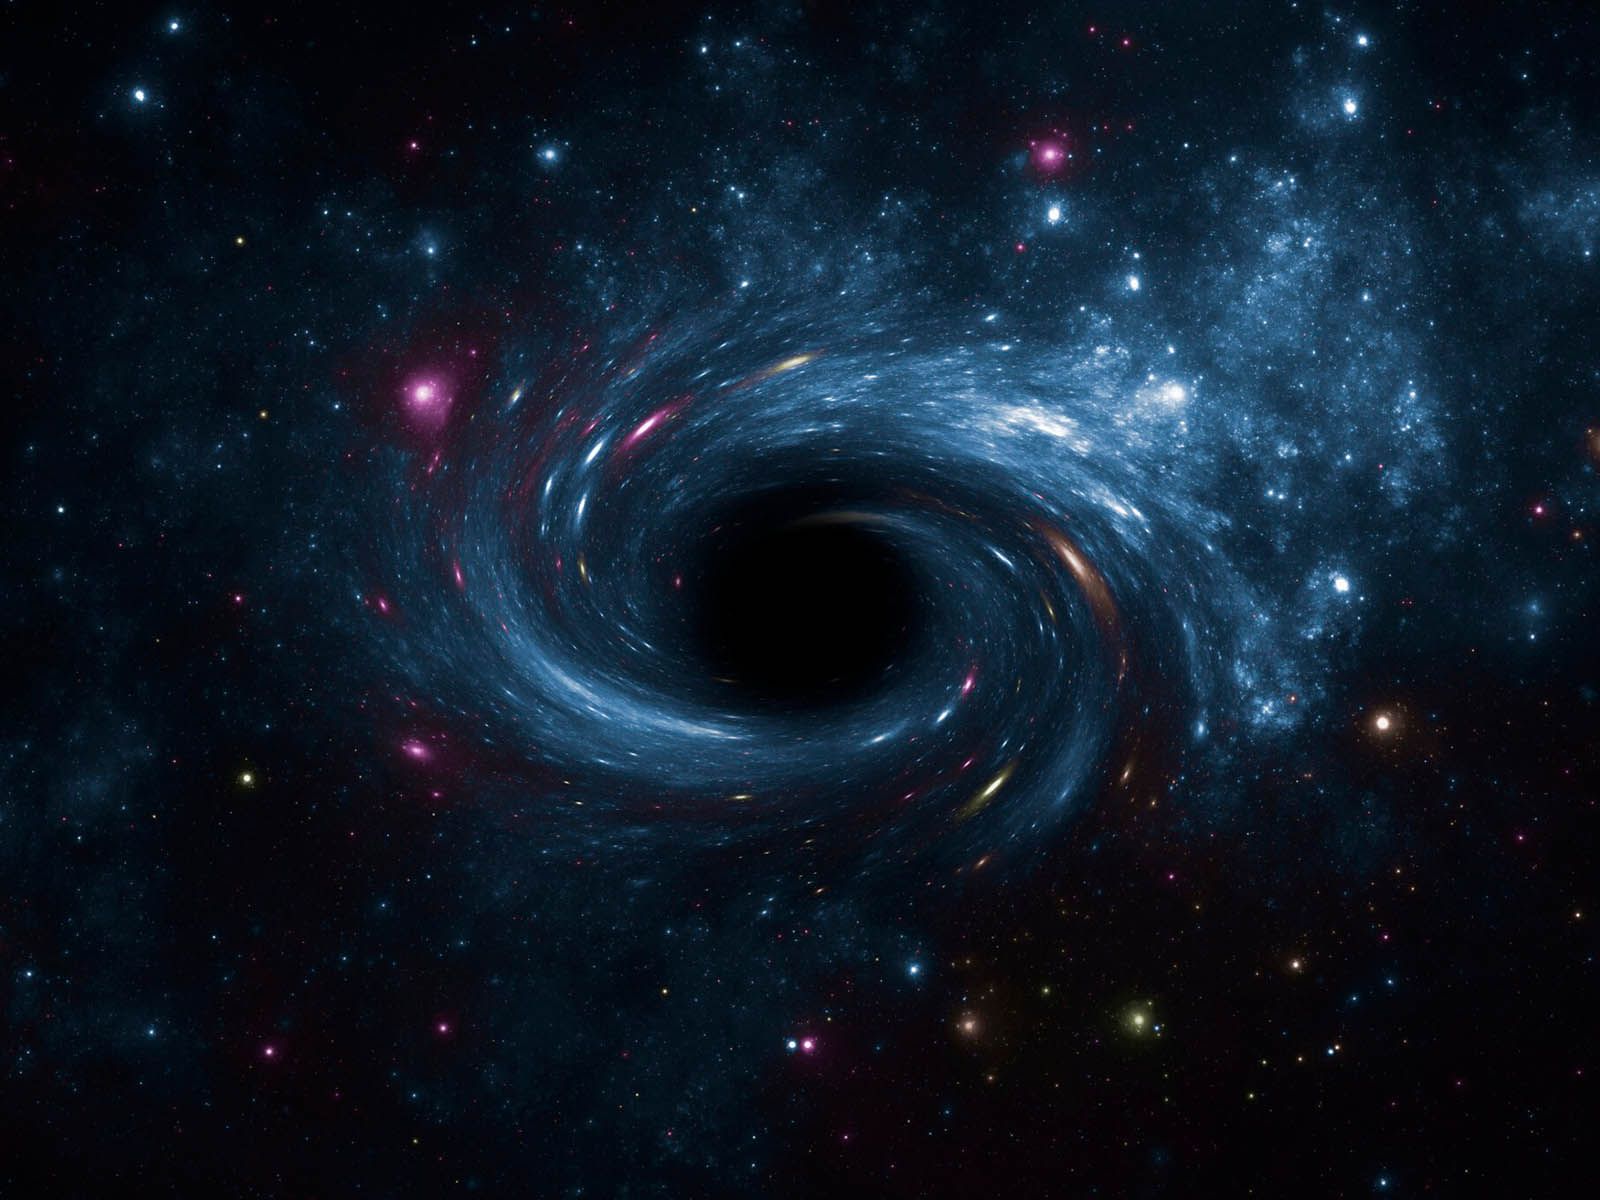 NASA publishes the sound emitted by a black hole